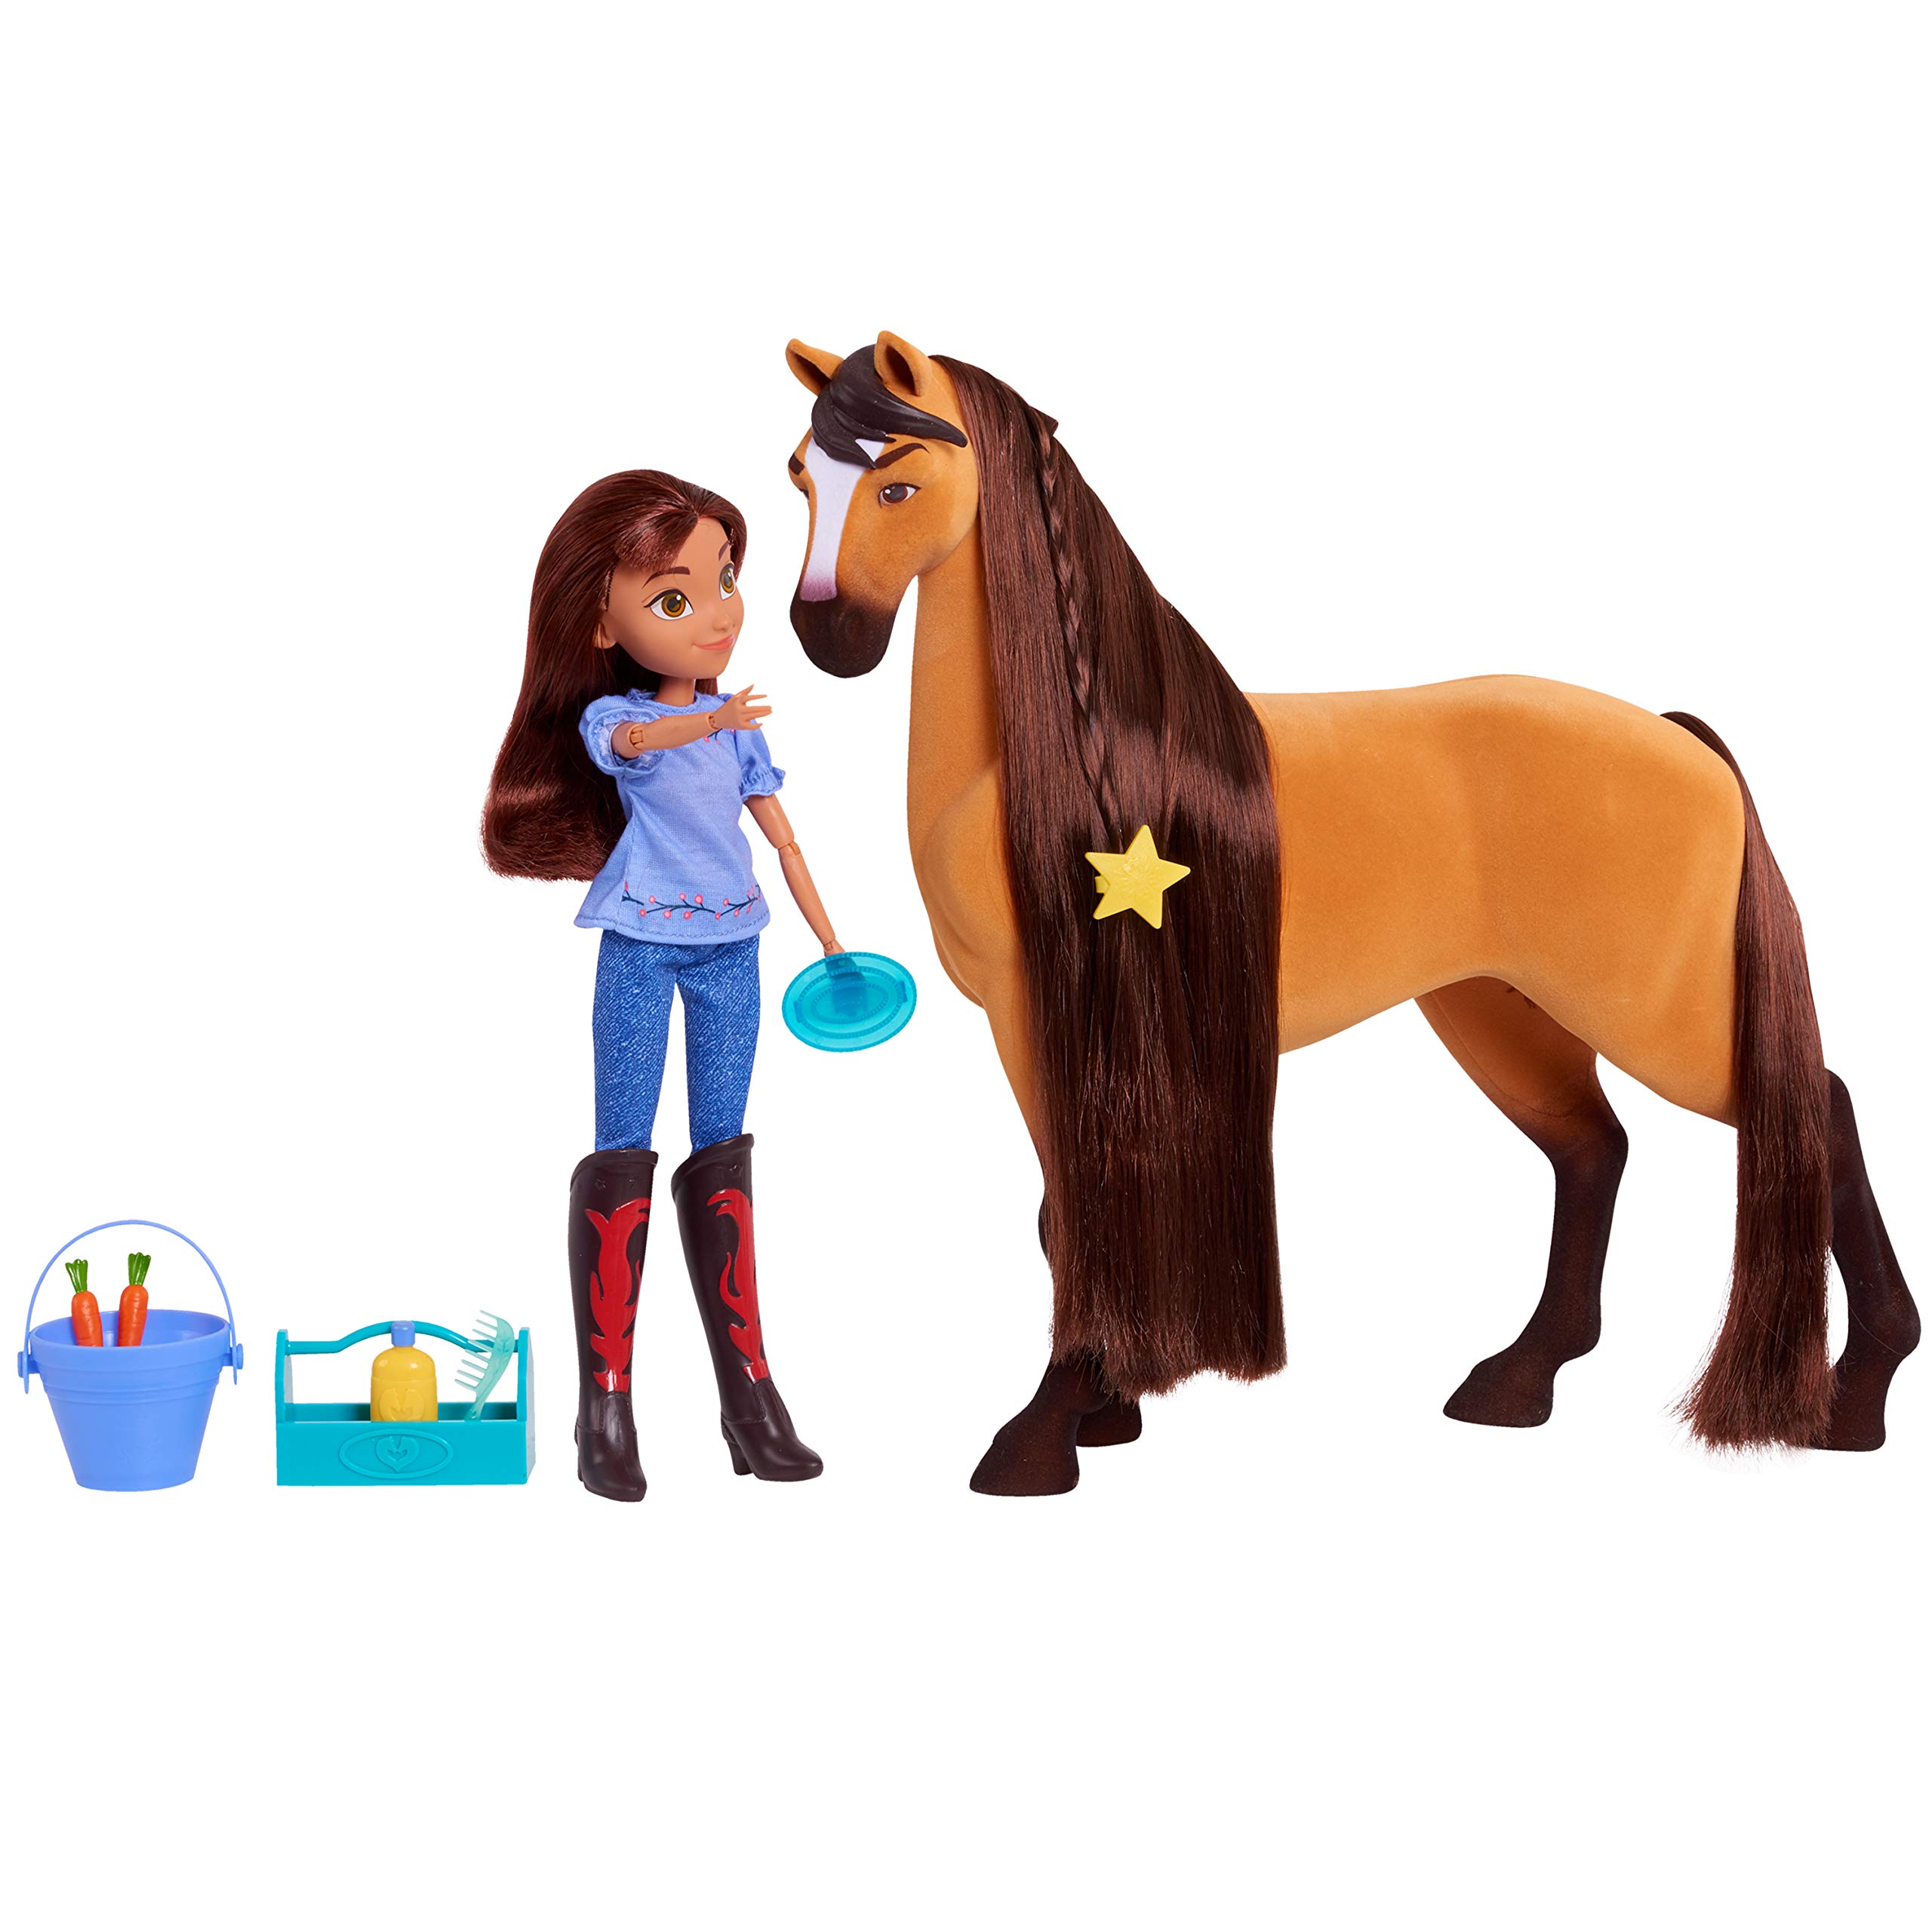 DreamWorks Spirit Riding Free Deluxe 14 Inch Spirit Horse and 11.5 Inch Lucky Doll Set with Accessories, by Just Play